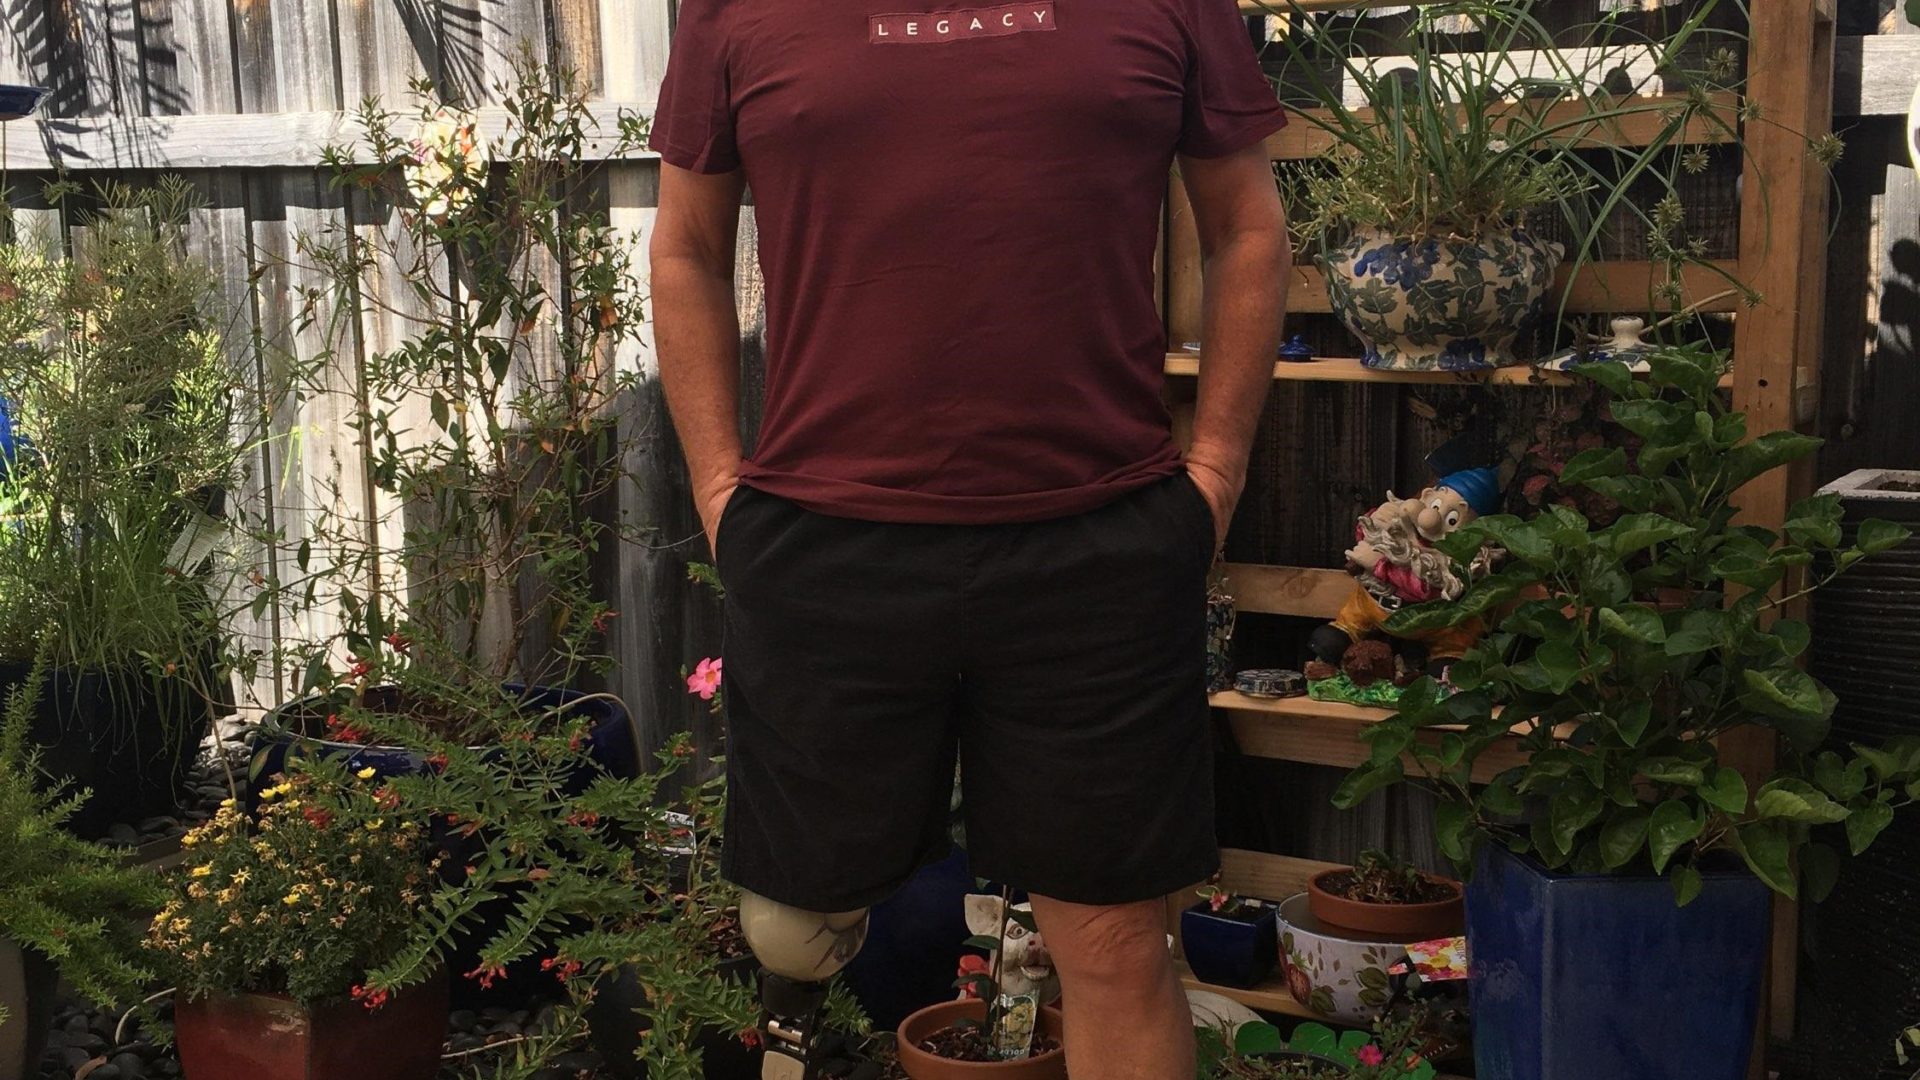 Robert, aged 67, stands in his garden in shorts with his prosthetic leg visible.